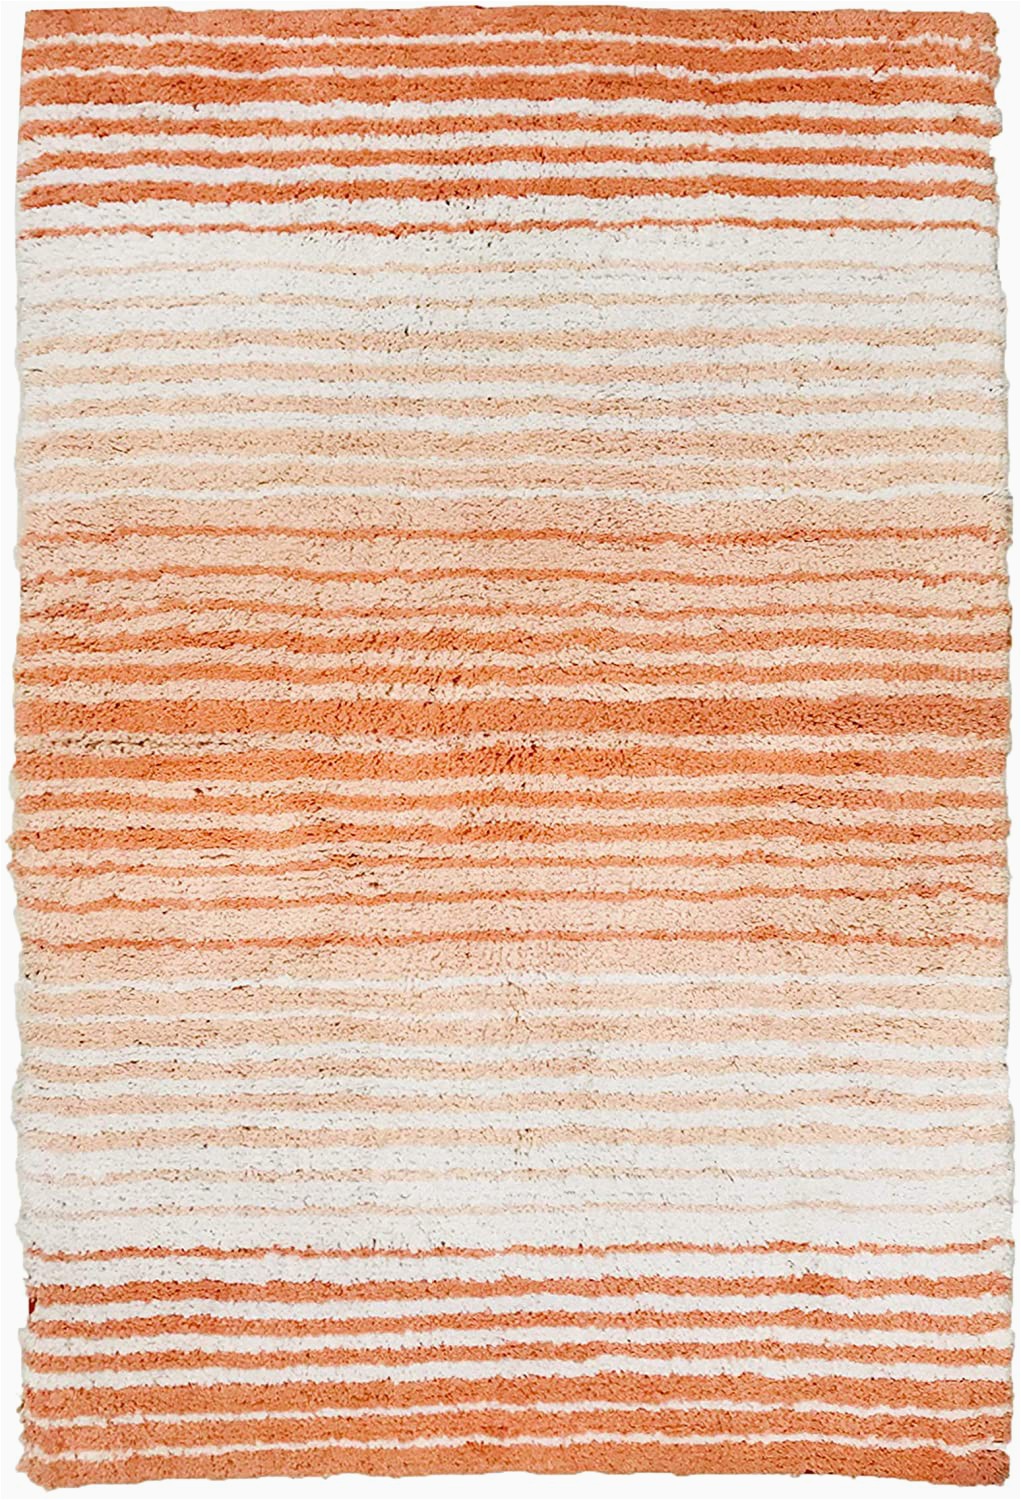 Chenille Lines Bath Rug Collection Home Weavers Gradiation Collection Absorbent Cotton soft Rug Machine Wash Dry 24"x40" Coral